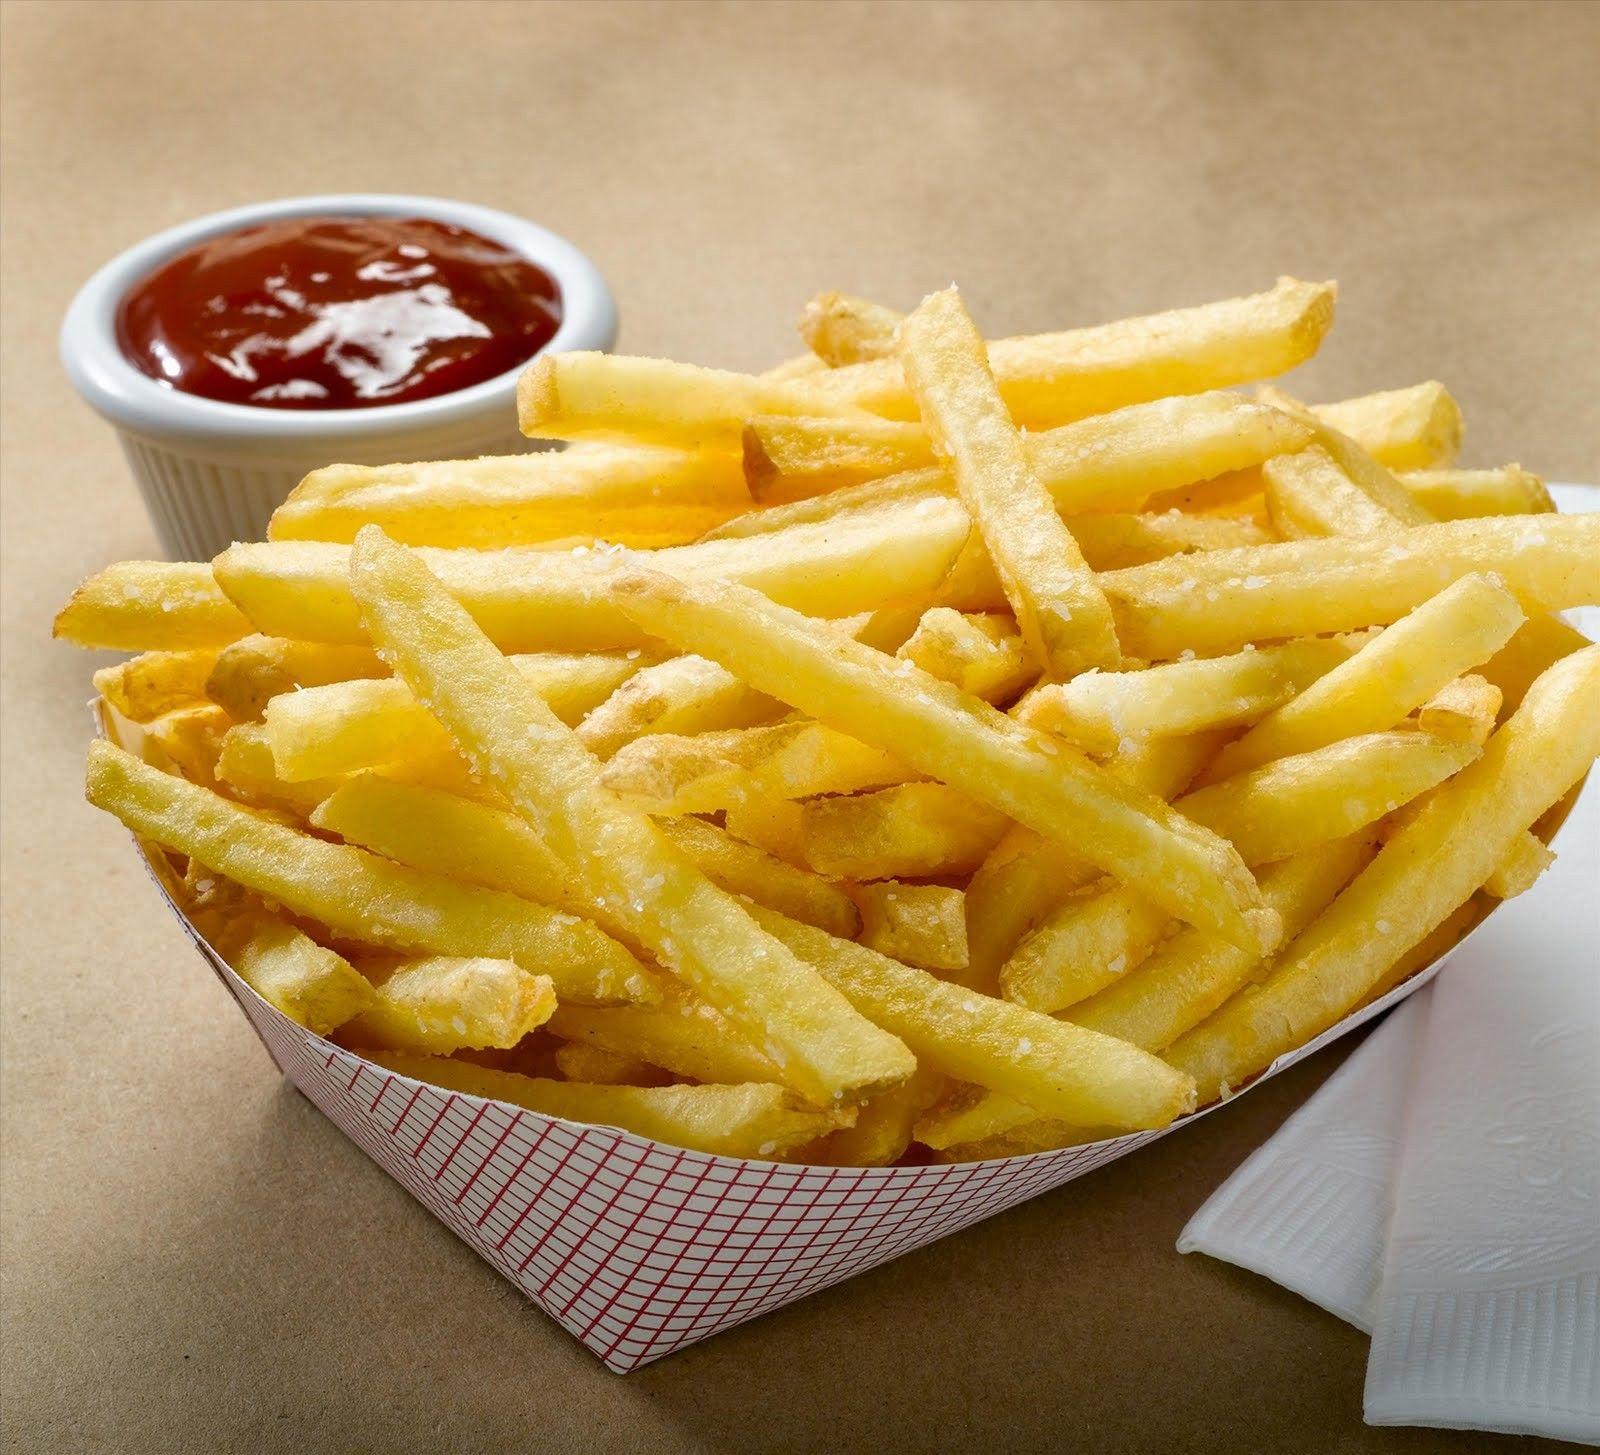 image Of French Fries Image